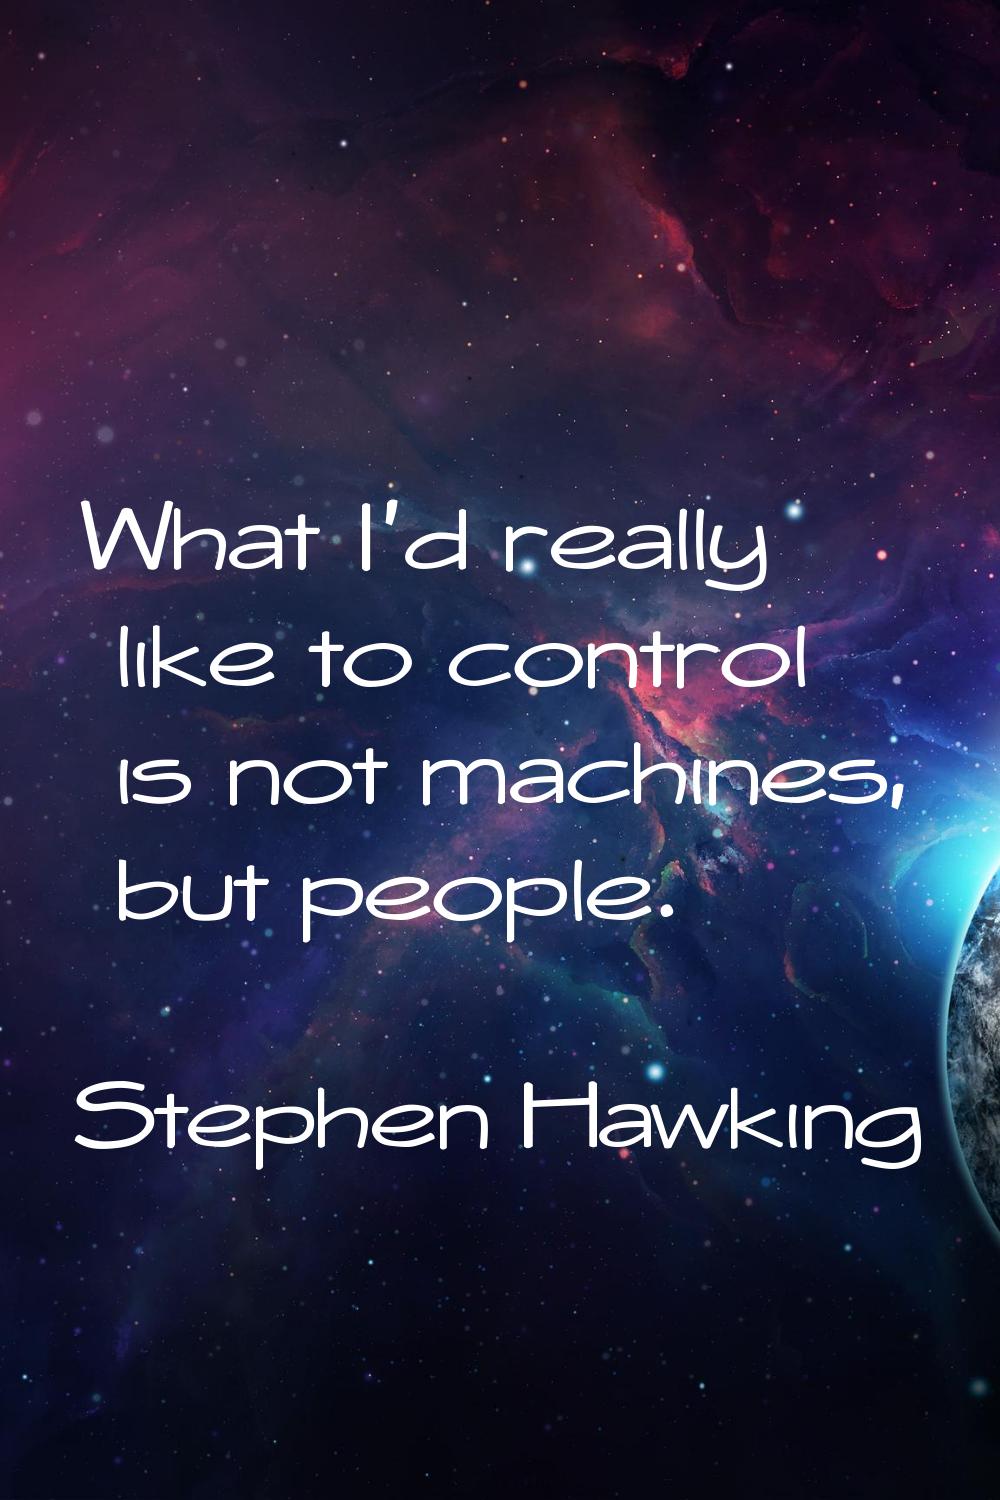 What I'd really like to control is not machines, but people.